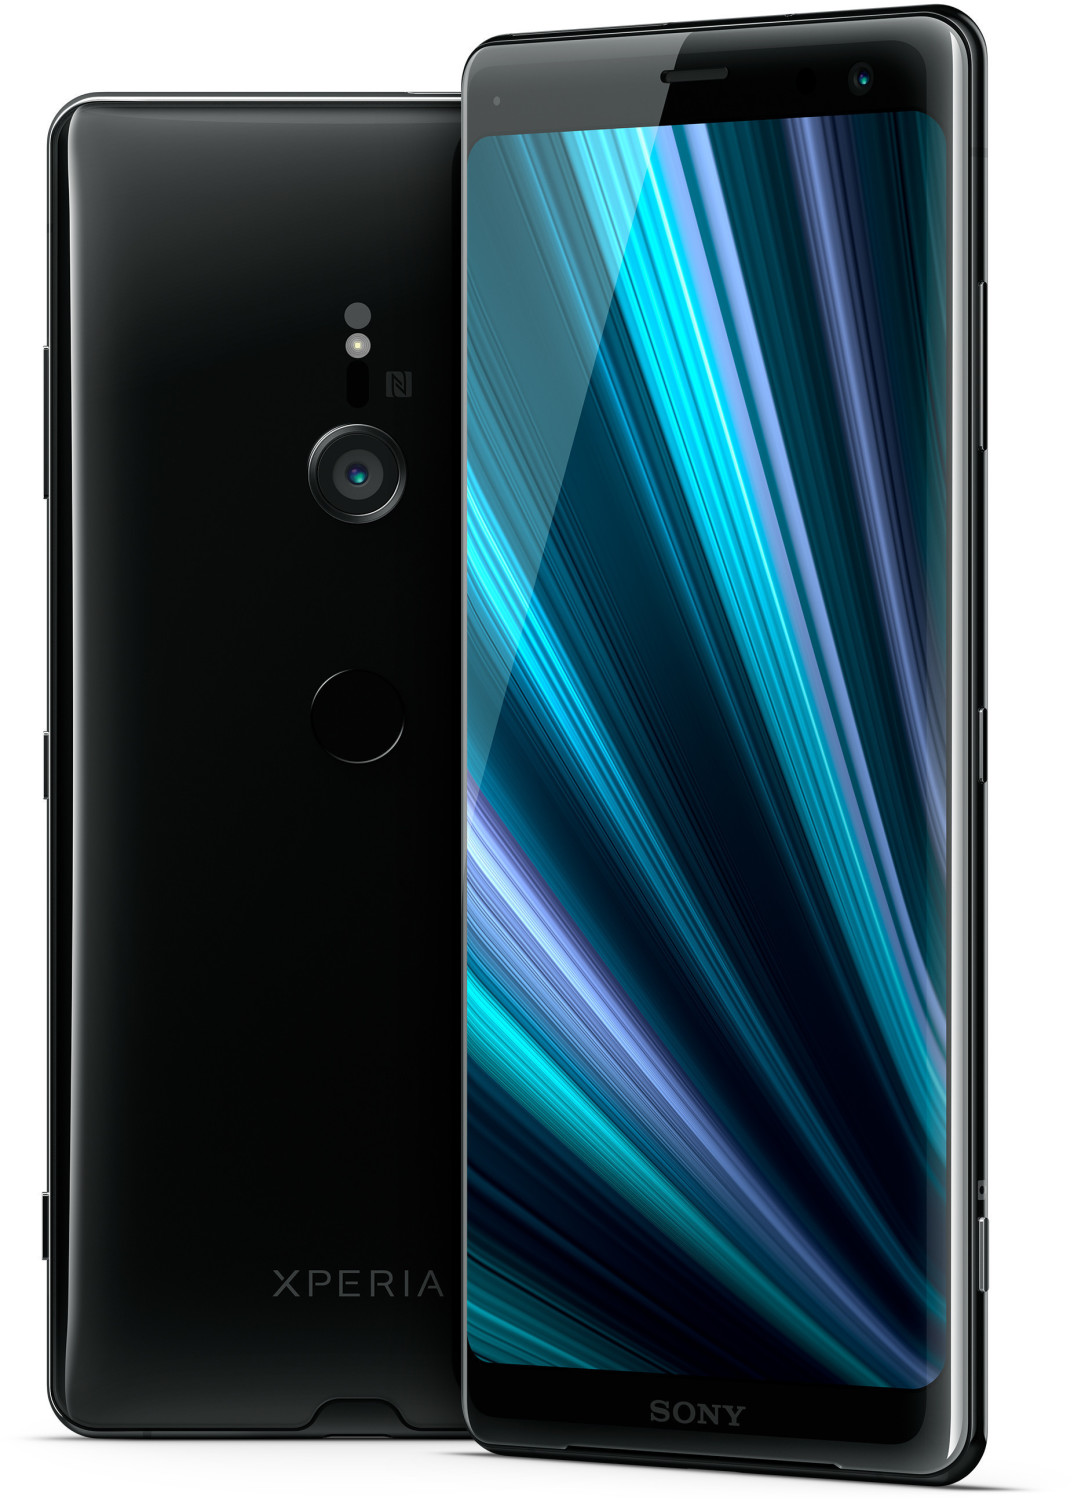 Buy Sony Xperia XZ3 from £115.55 (Today) – Best Deals on idealo.co.uk